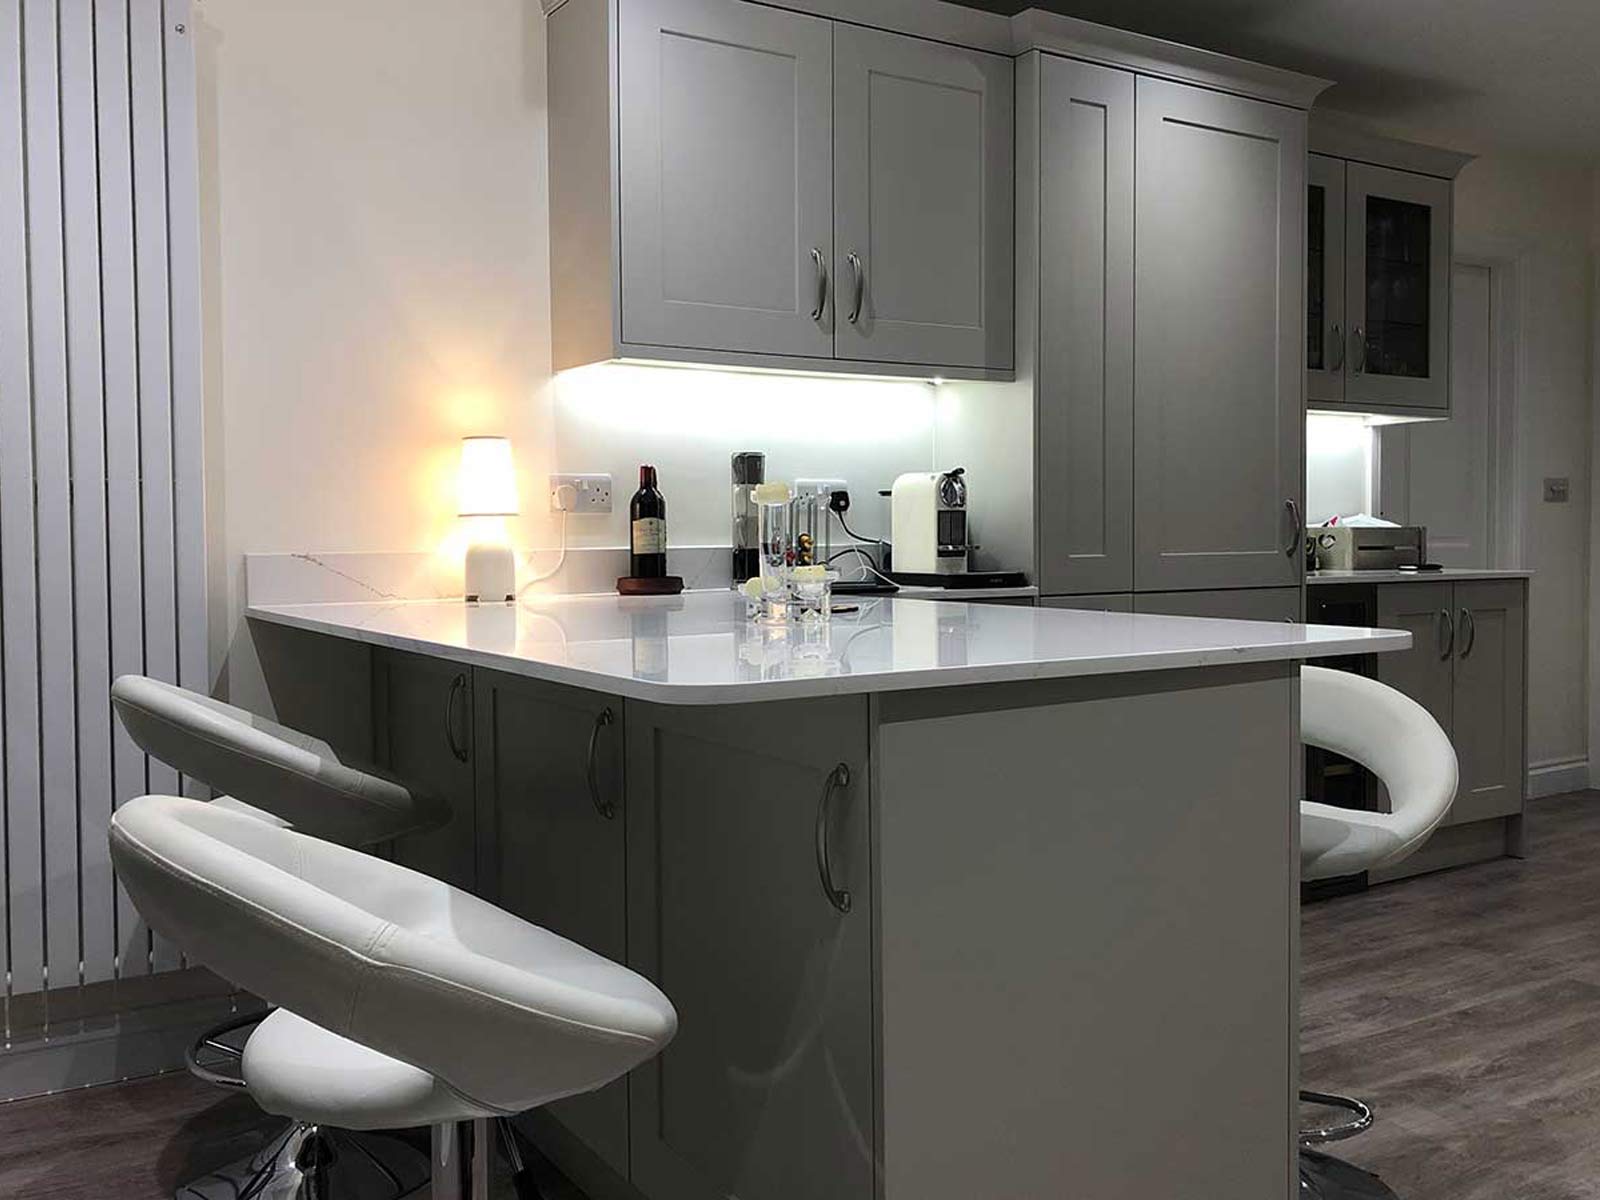 A kitchen peninsula counter with mobile kitchen island barstools